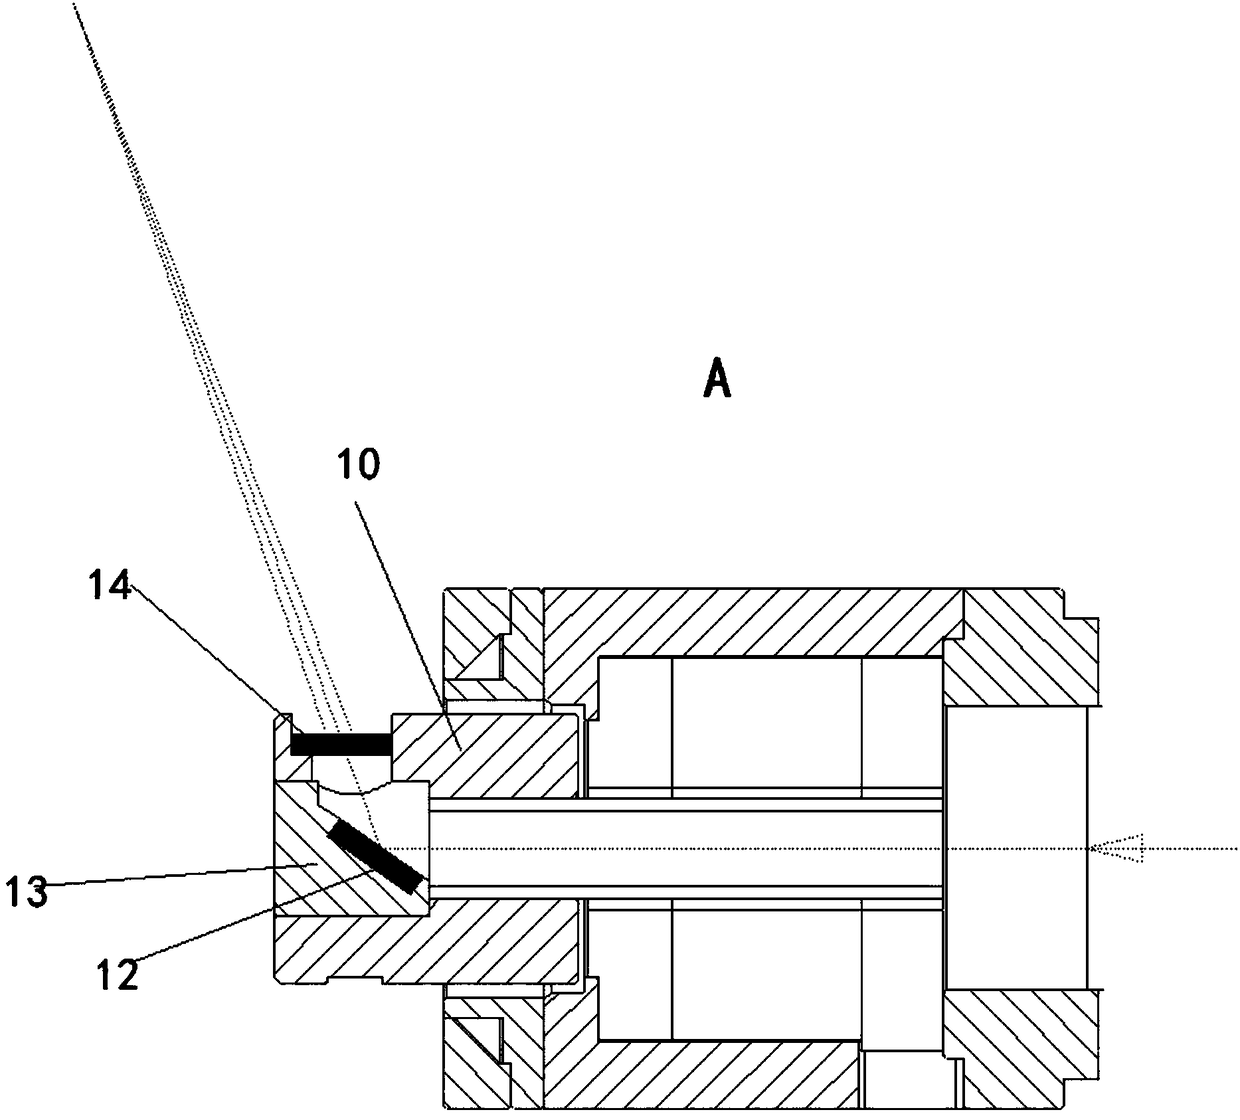 Laser cleaning mechanism used for pipeline inner wall